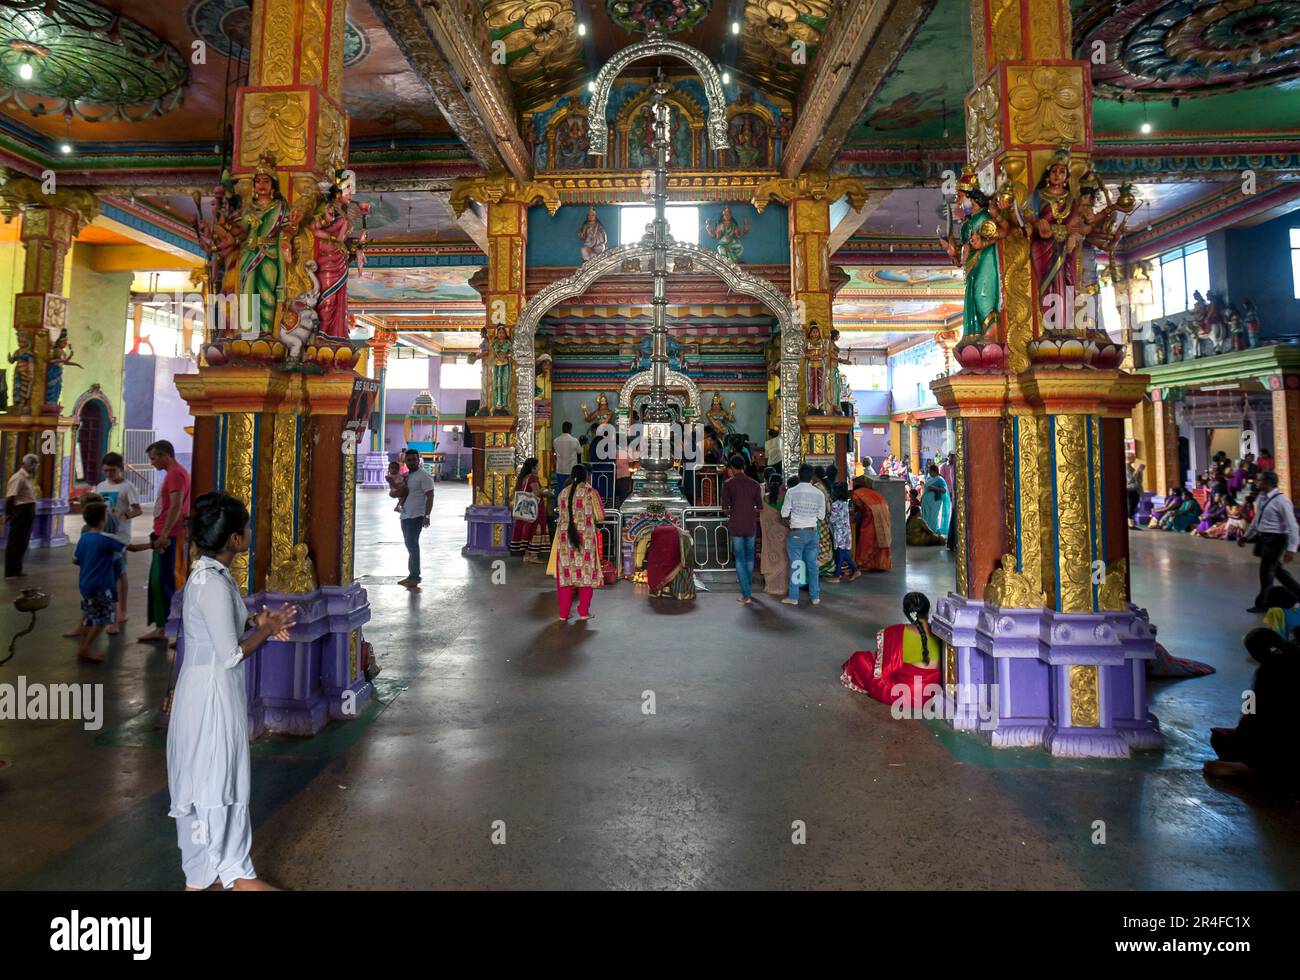 Worshippers gathered at the shrine room within Sri Muthumariamman Thevasthanam Hindu Temple at Matale in Sri Lanka. Stock Photo